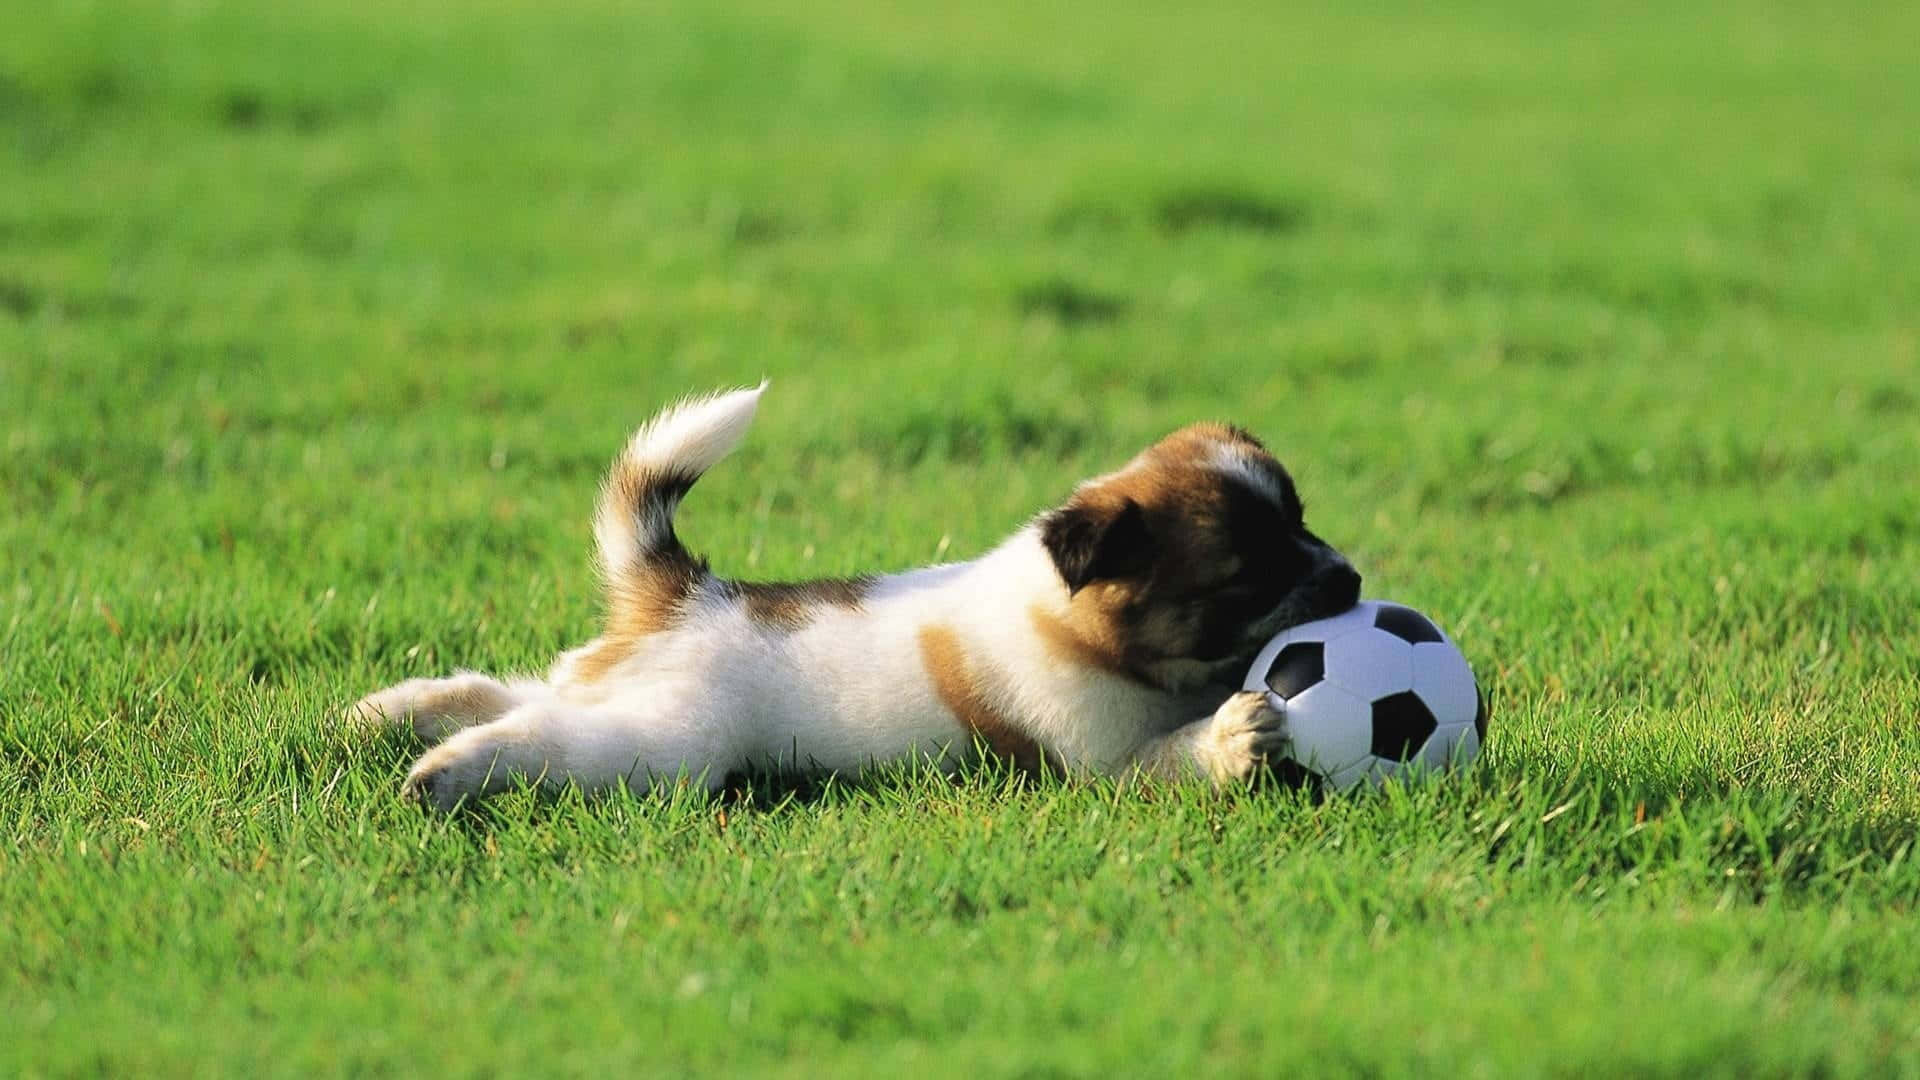 A Small Dog Playing With A Soccer Ball